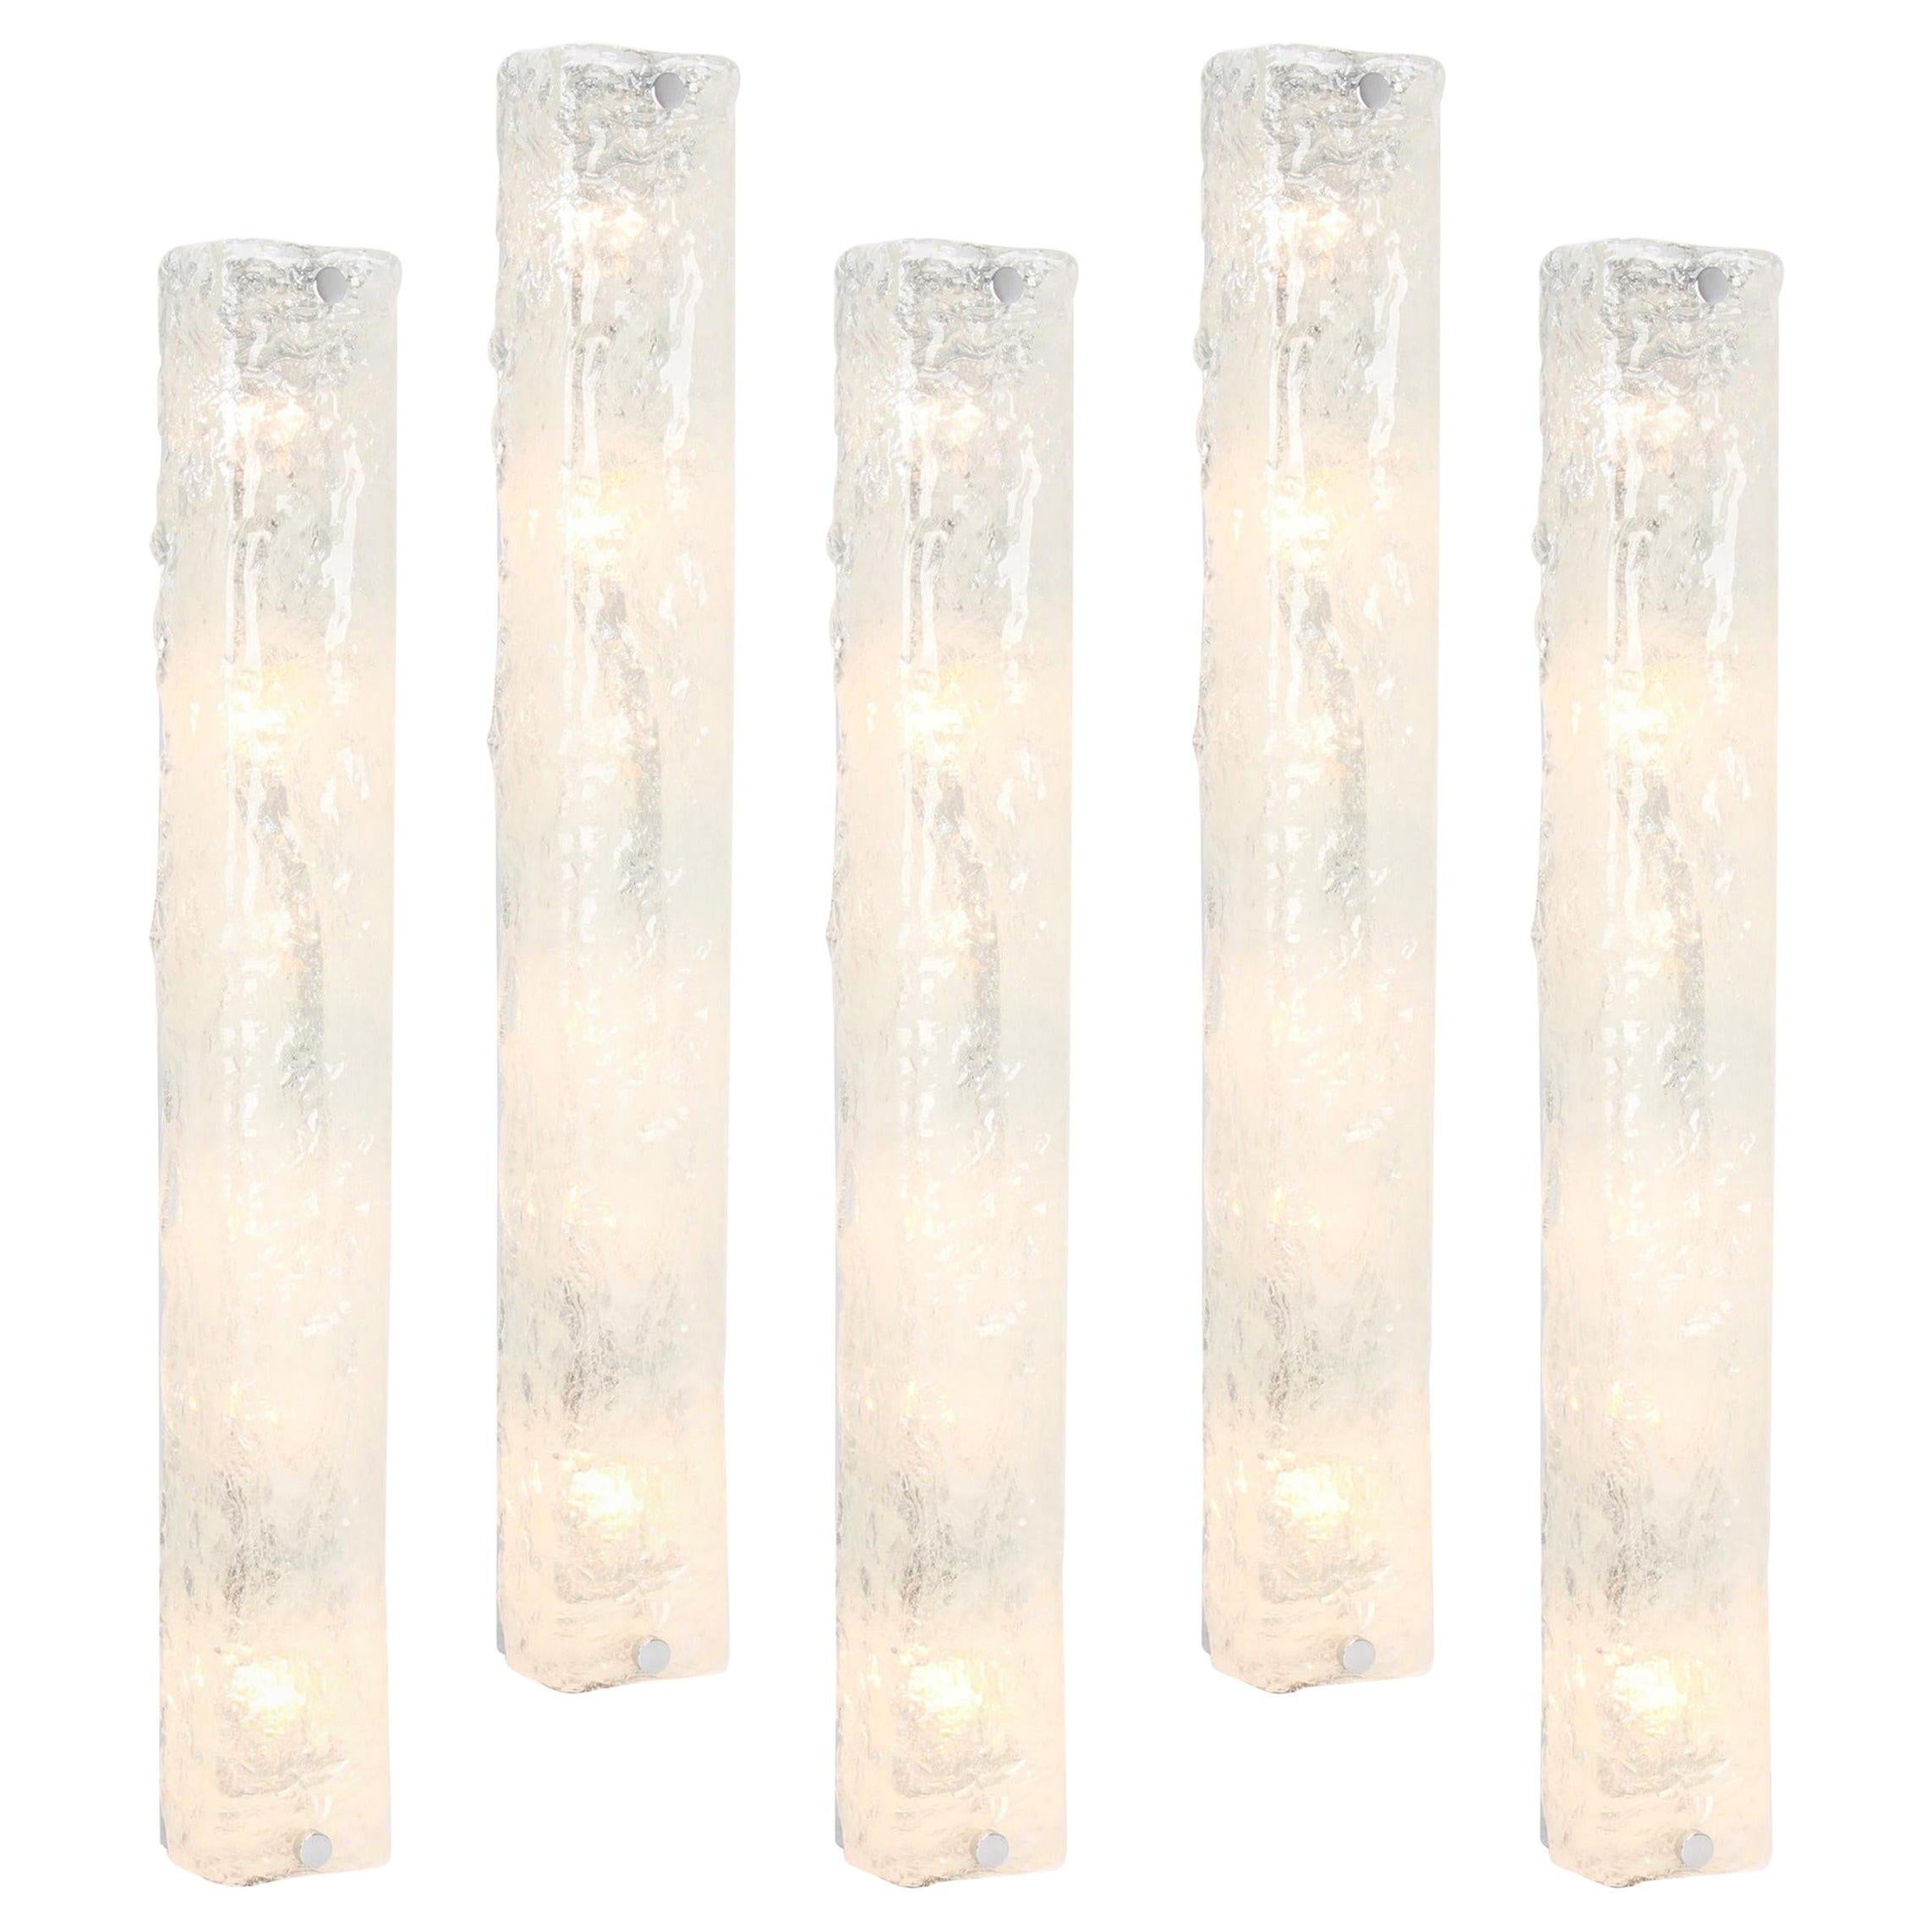 1 of 5 Extra Large Murano Glass Sconces Wall Fixtures by Hillebrand, Germany